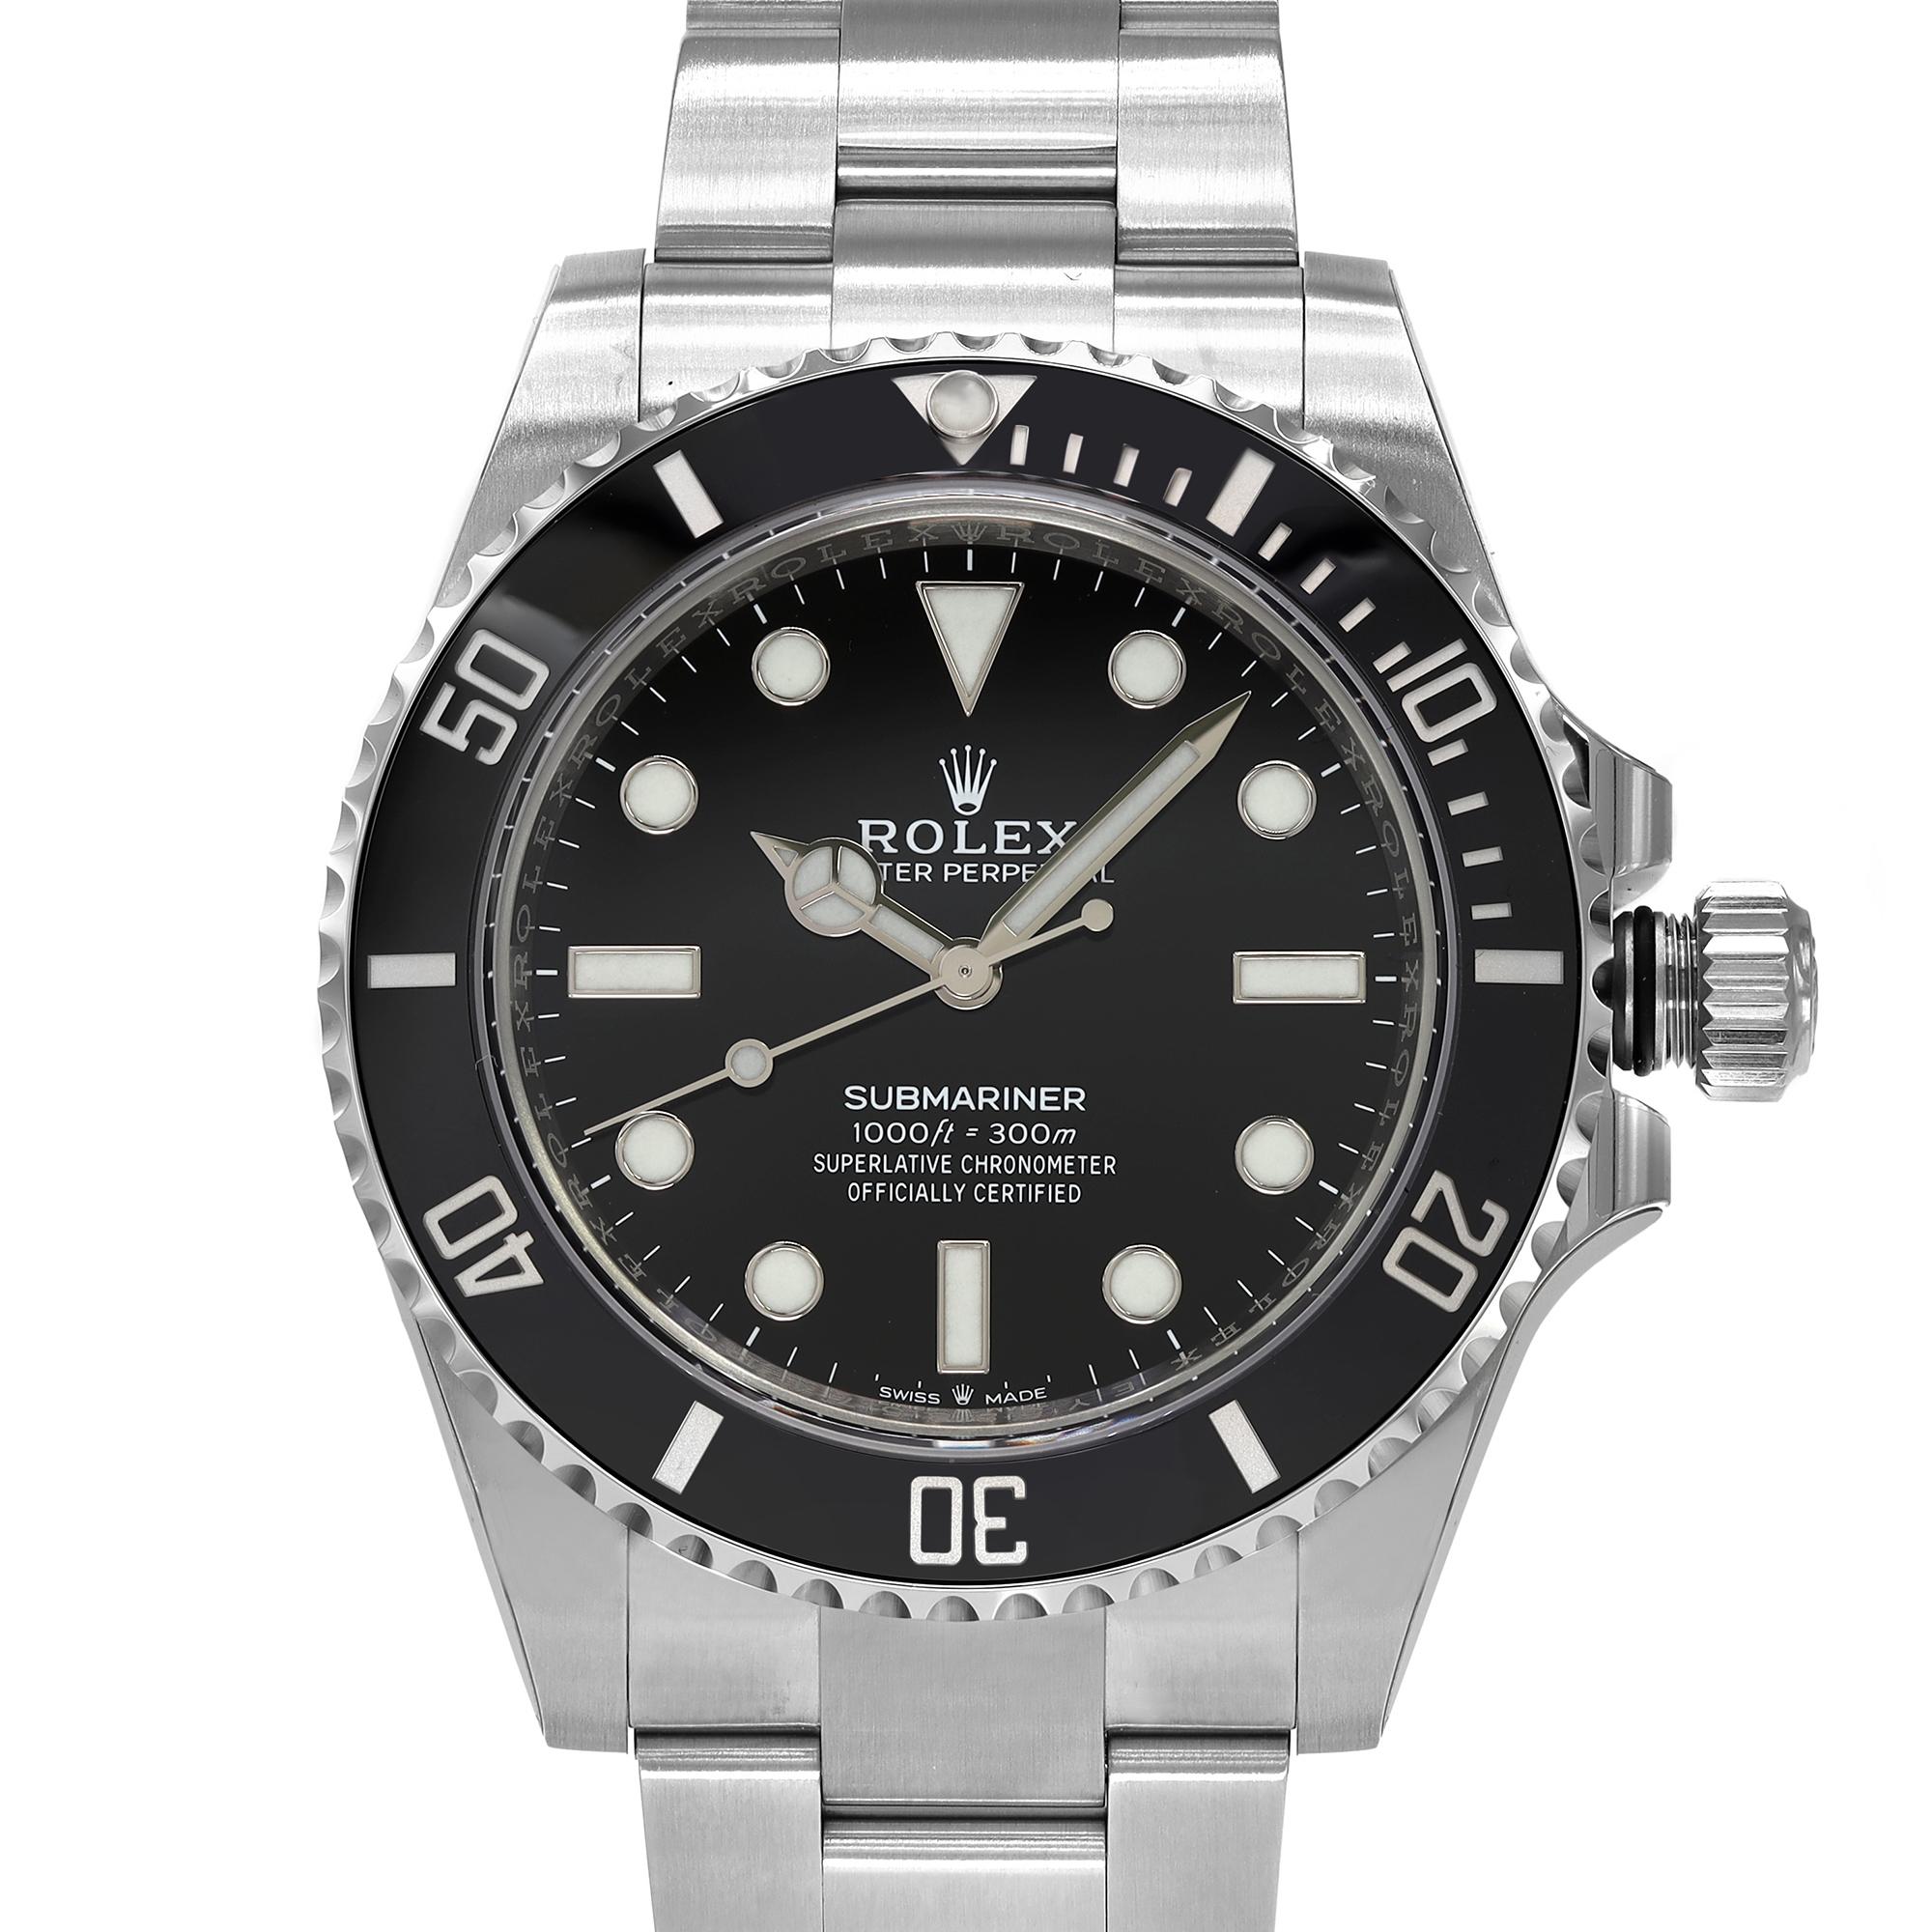 Unworn 2022 Card. Fully Stickered. Rolex Submariner No Date 41mm Steel Ceramic Black Dial Automatic Watch 124060. This Beautiful Timepiece Is Powered by Mechanical (Automatic) Movement. Features: Round Stainless Steel Case with a Stainless Steel